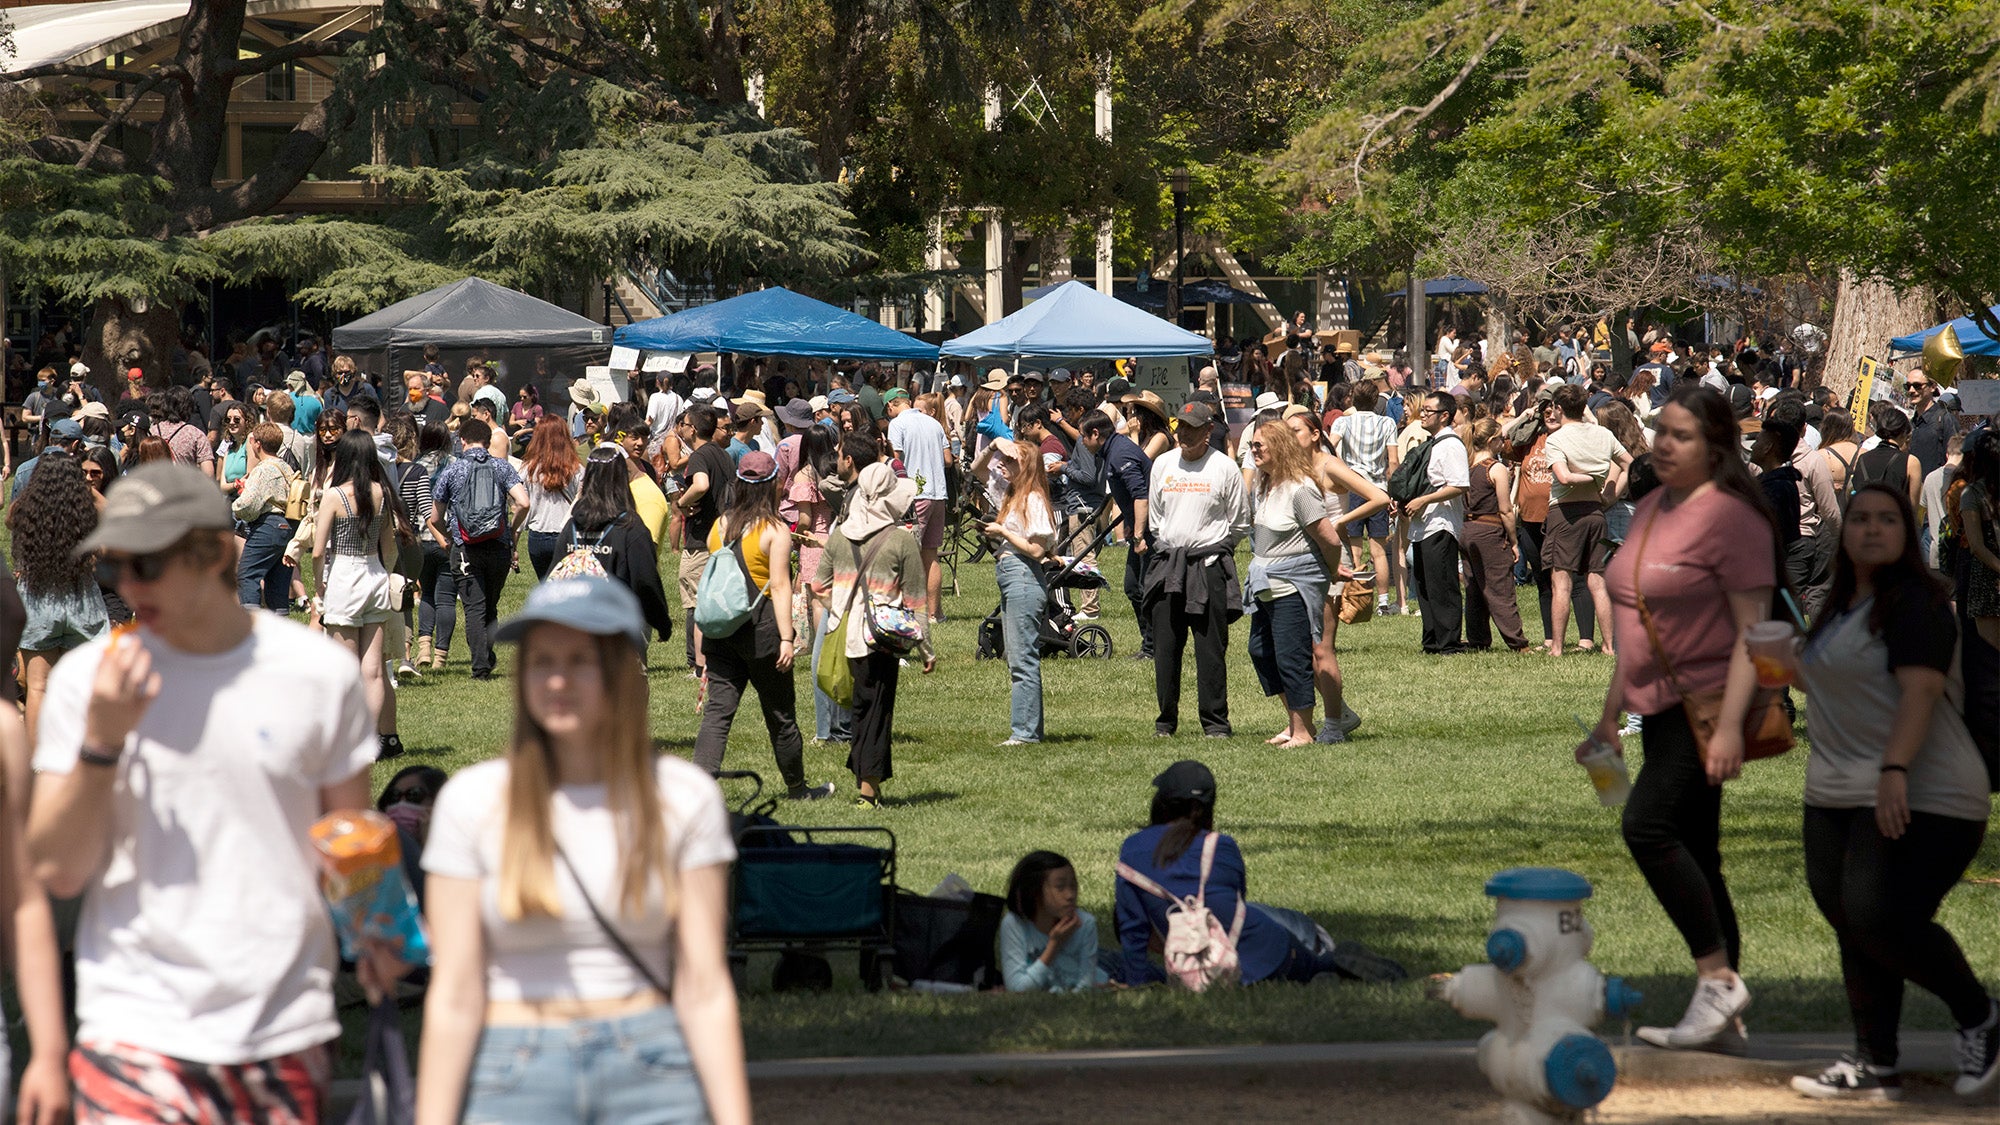 Large crowds of people gather on the Quad.